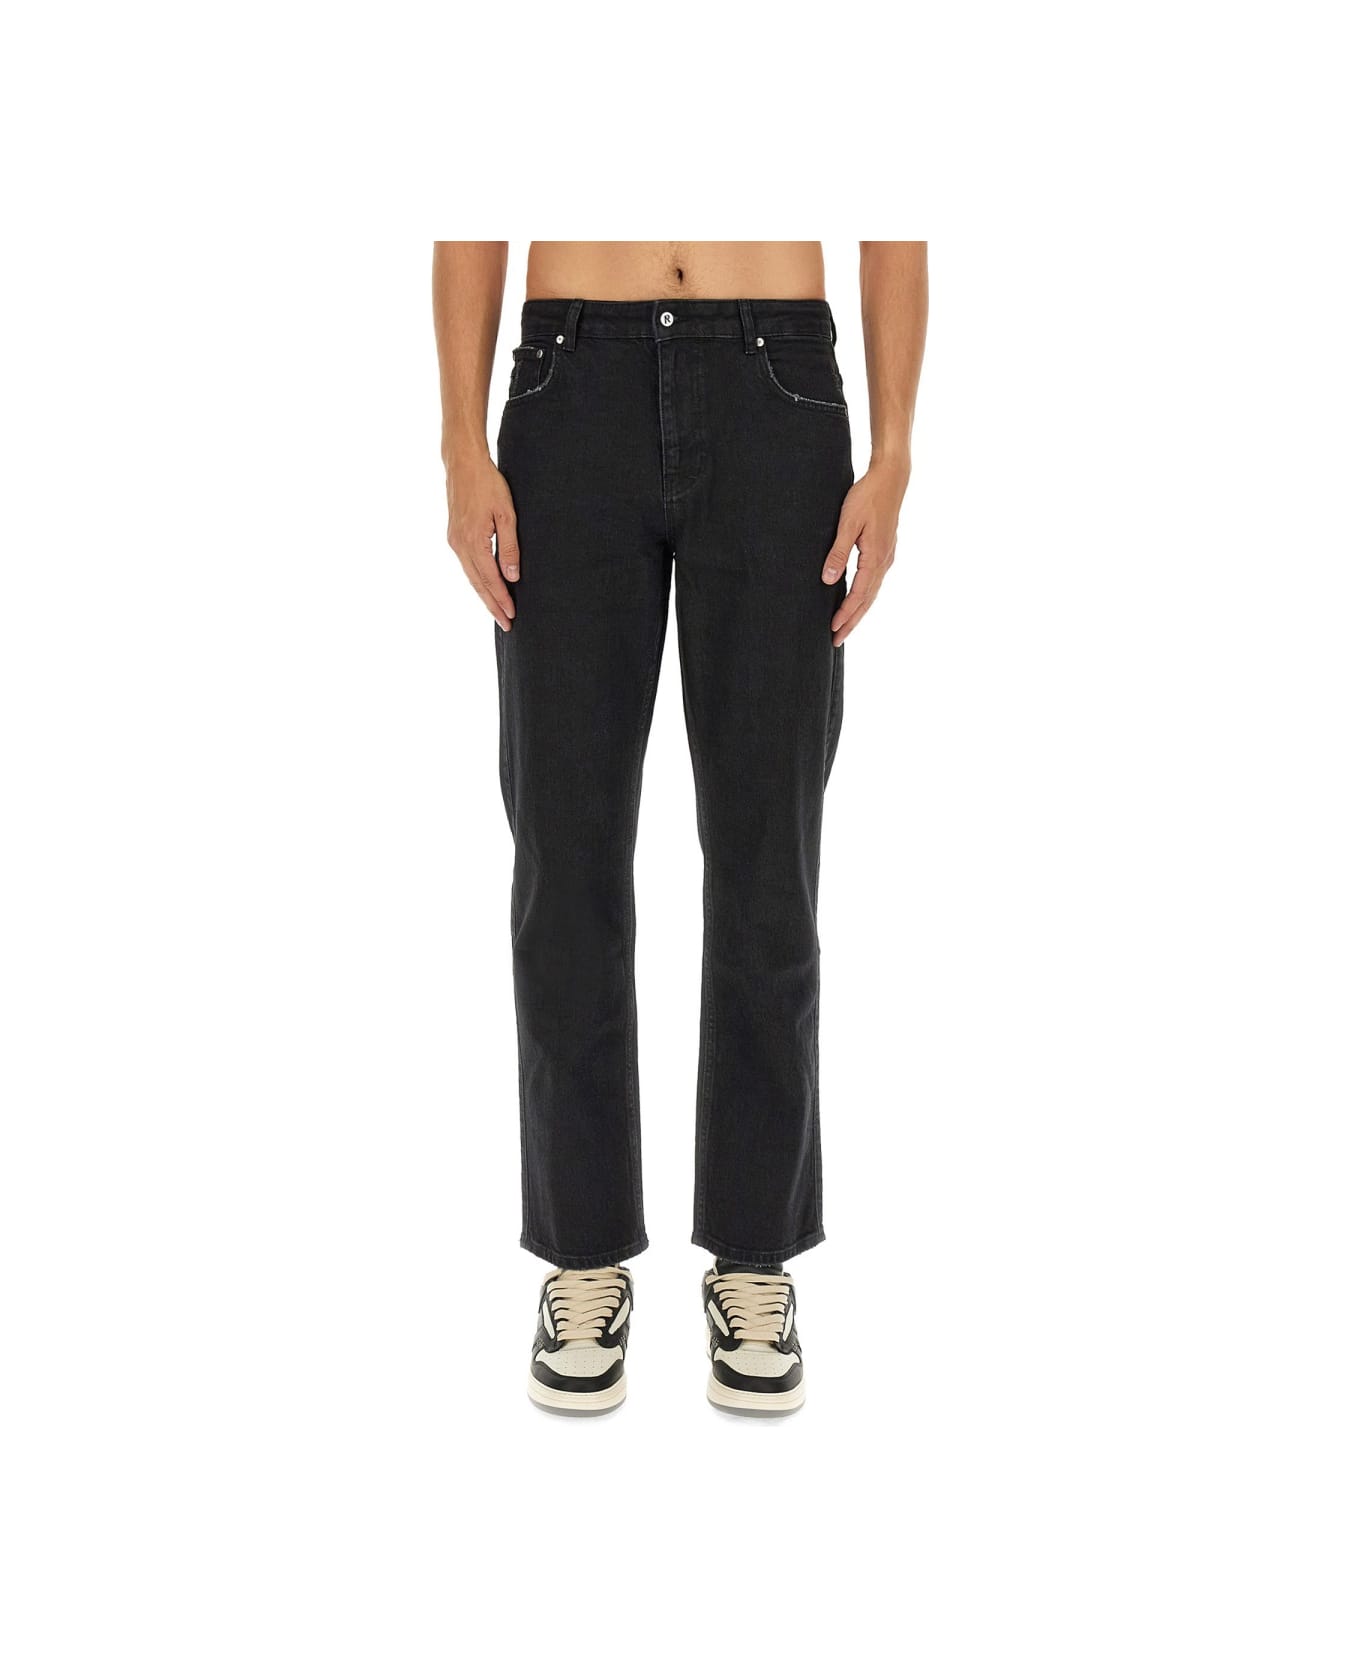 REPRESENT Straight Fit Jeans - BLACK